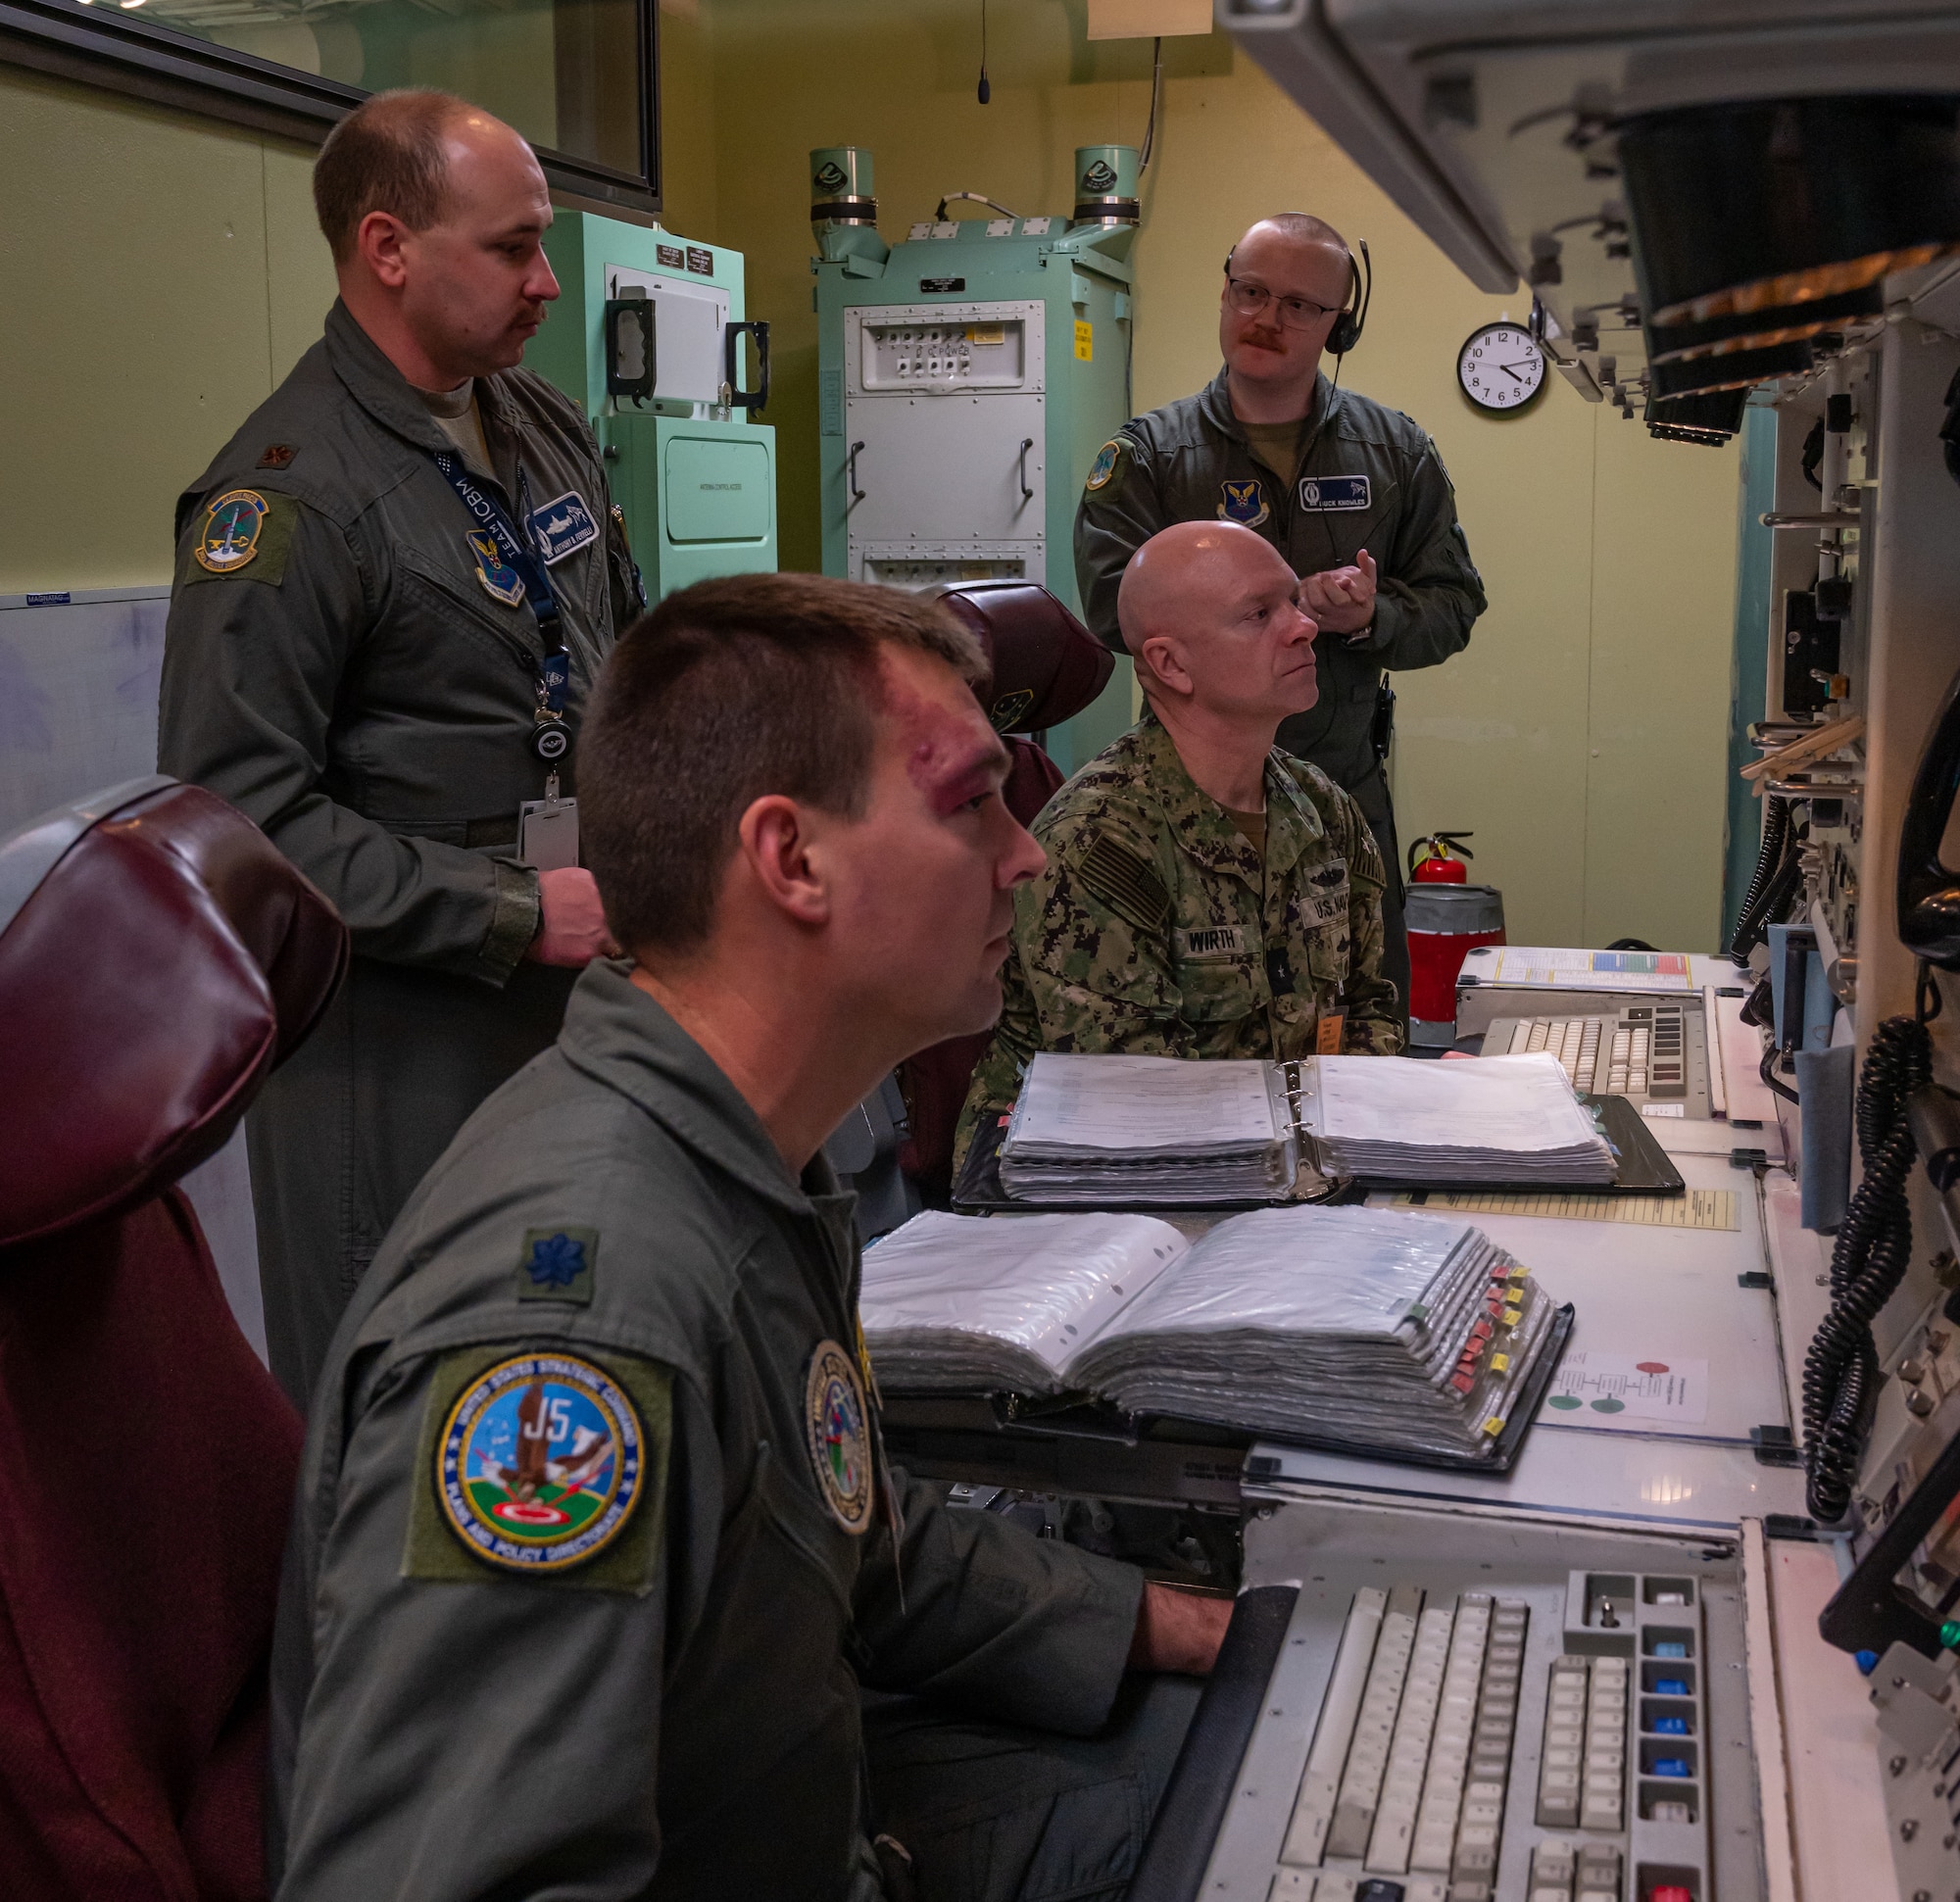 Rear Adm. Robert Wirth, J5N, U.S. Strategic Command deputy director, strategic targeting and nuclear mission planning, receives a demonstration at a Missile Procedure Trainer (MPT) at Minot Air Force Base, North Dakota, Nov. 29, 2023. The MPT mimics the environment of a launch control center which is used in the field to monitor and control missile launch facilities. (U.S. Air Force photo by Airman 1st Class Alexander Nottingham)